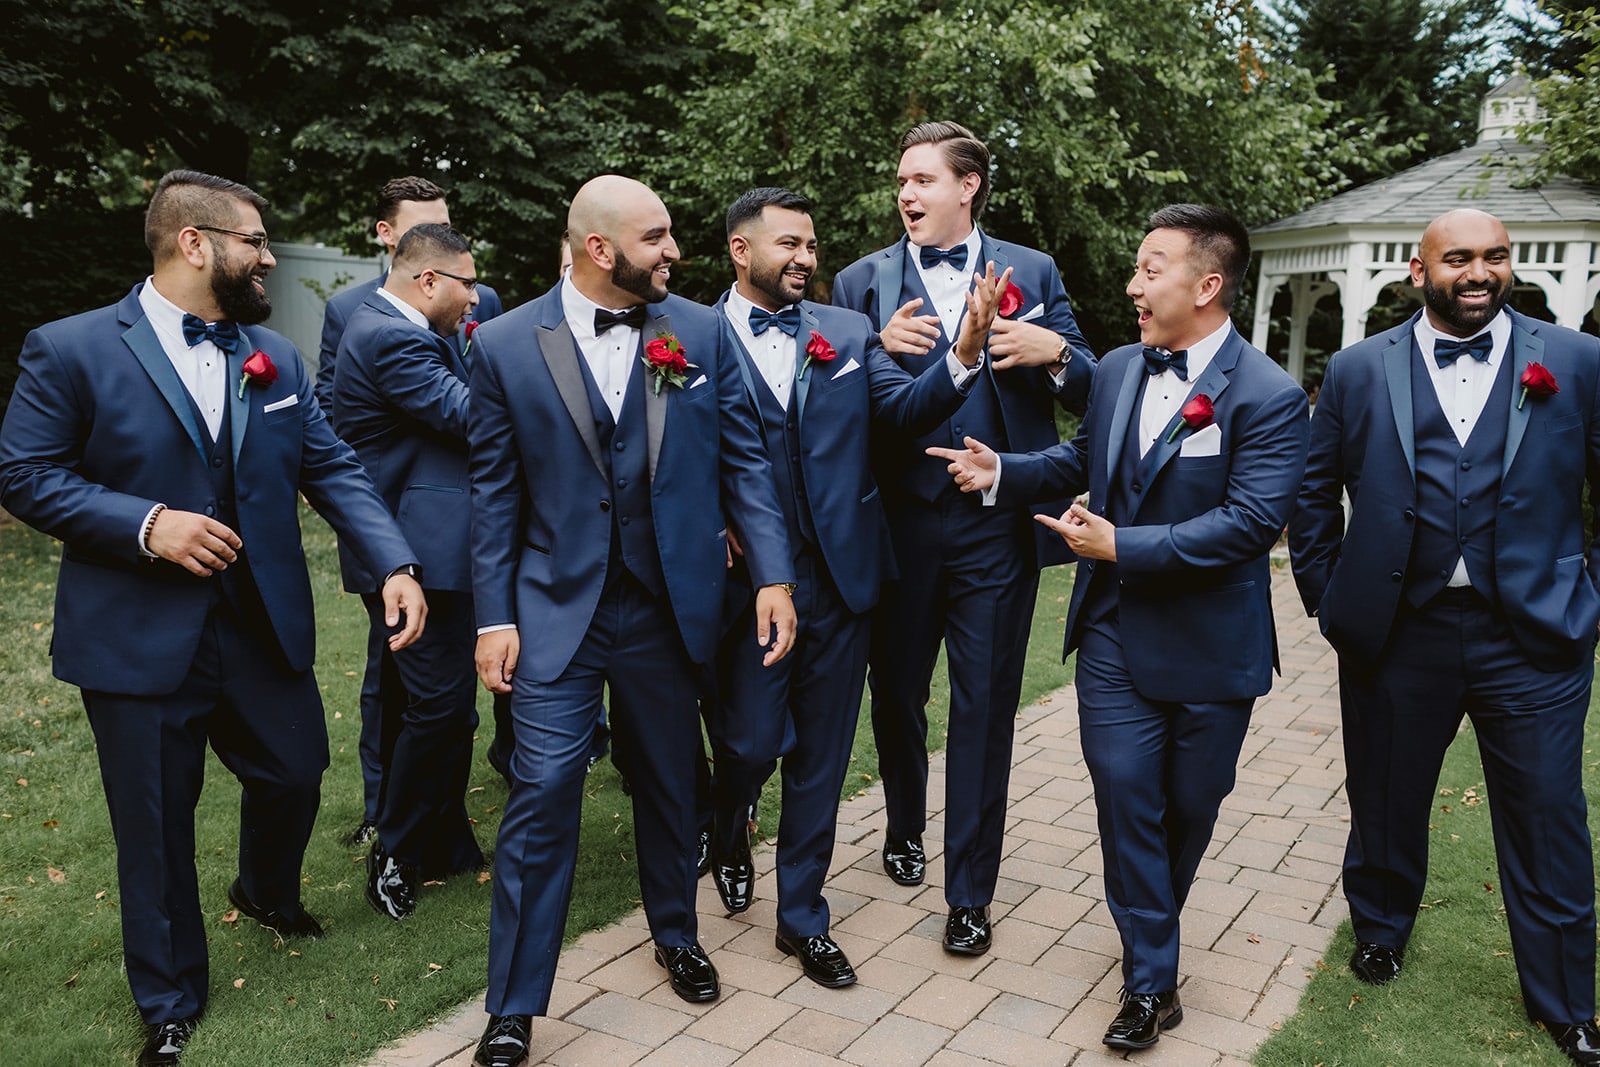 Groomsmen laughing and joking on the way to the wedding. Photo by Justin Johnson Photography.